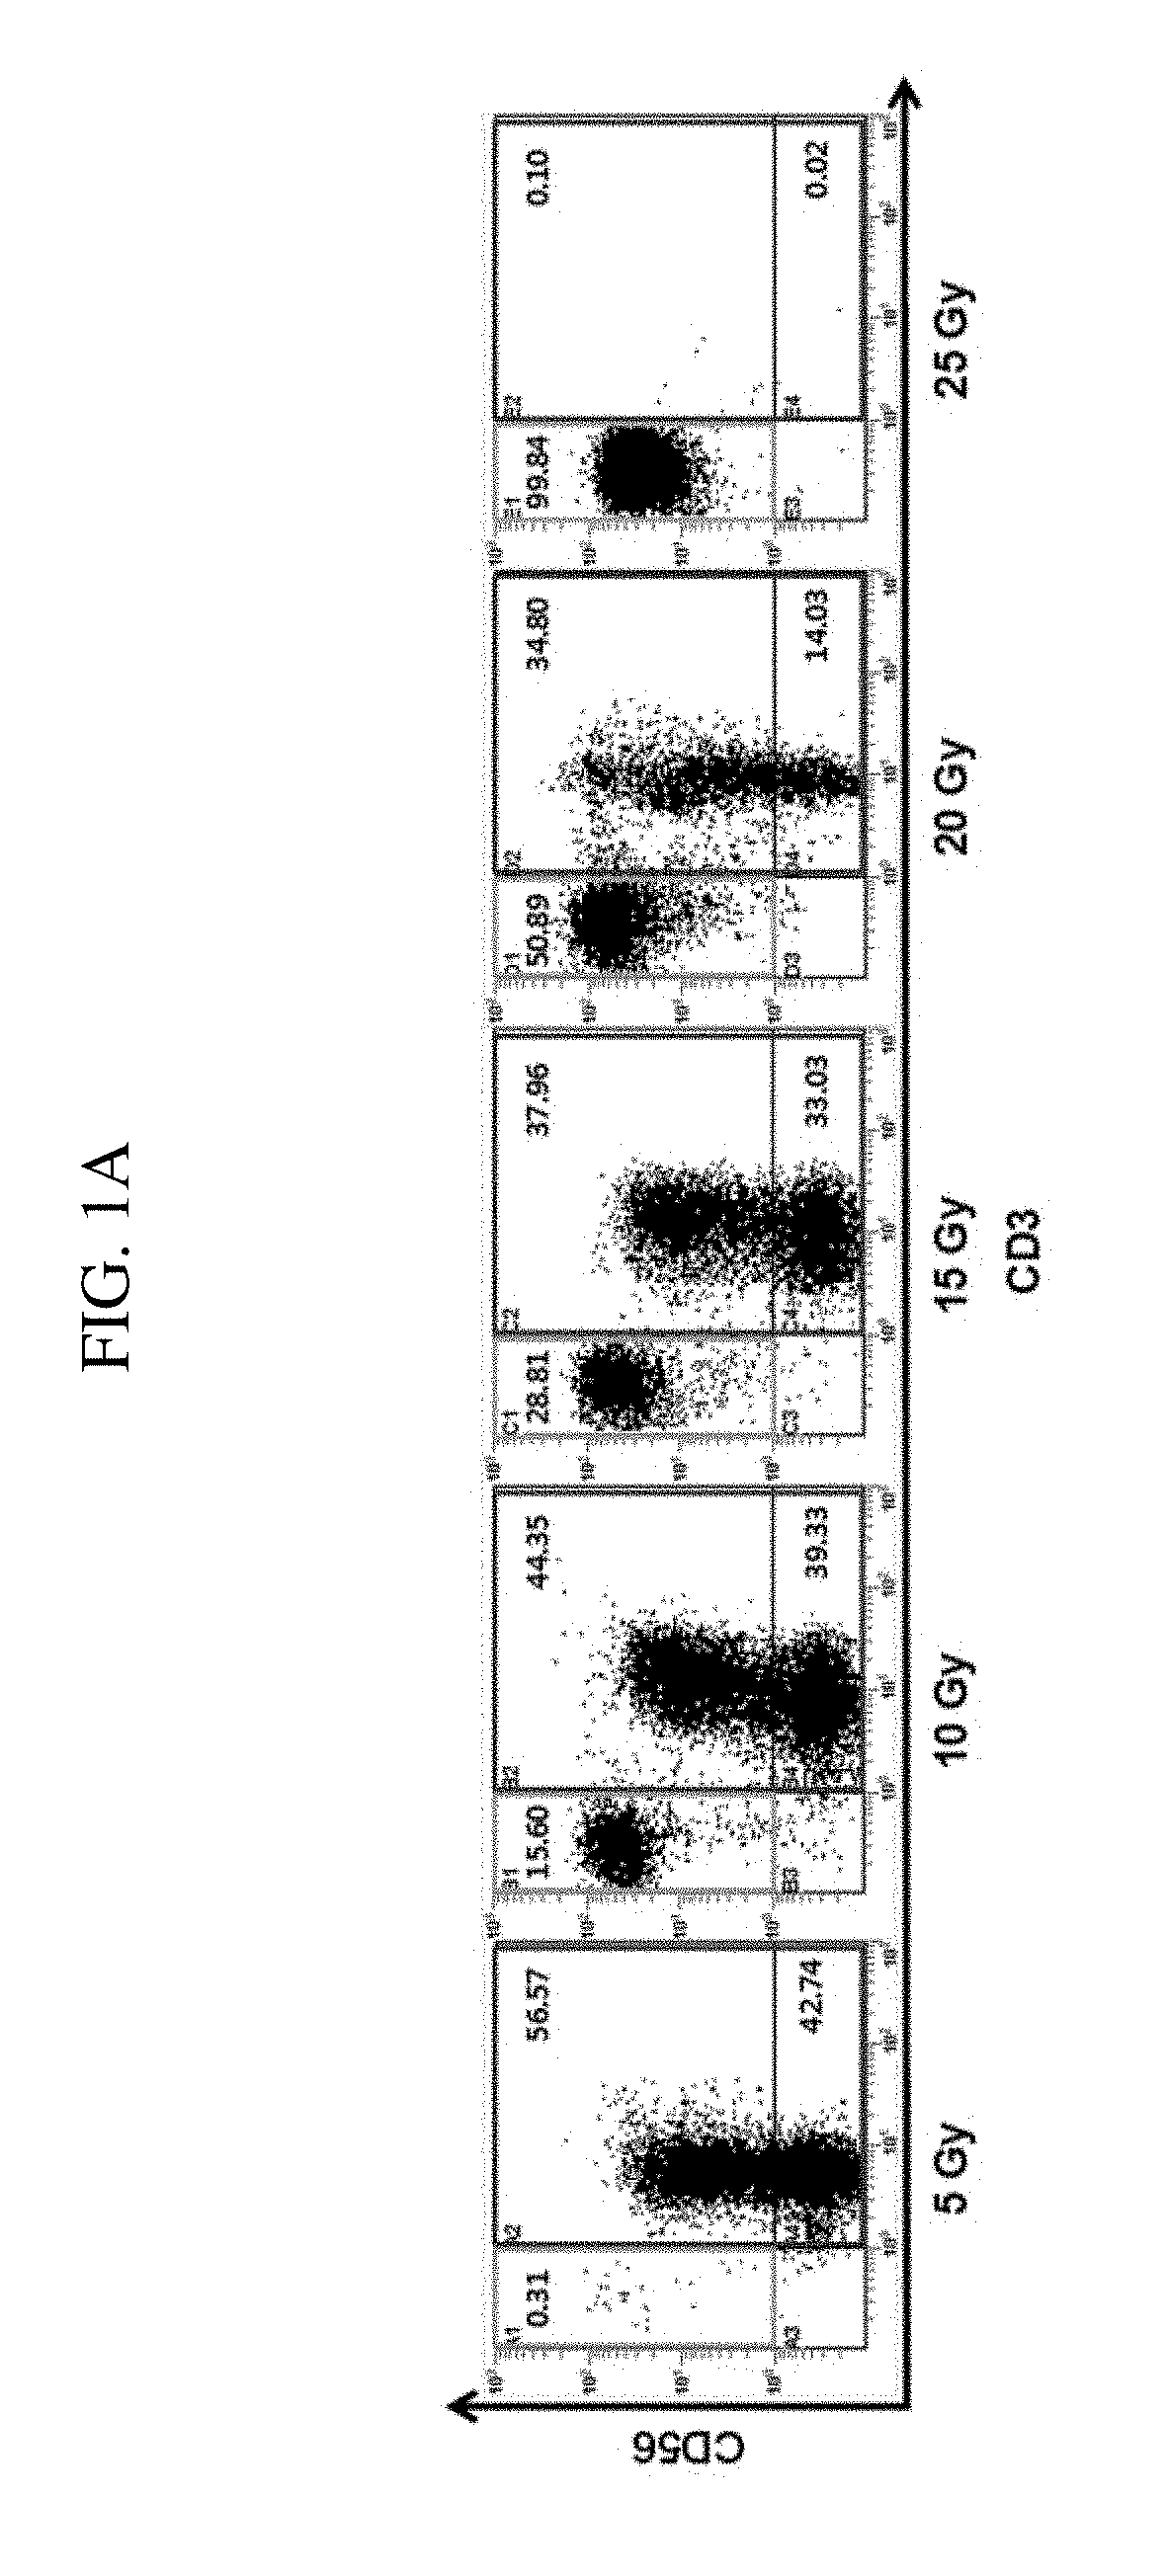 Method for preparing natural killer cells using irradiated pbmcs, and Anti-cancer cell therapeutic agent comprising the nk cells